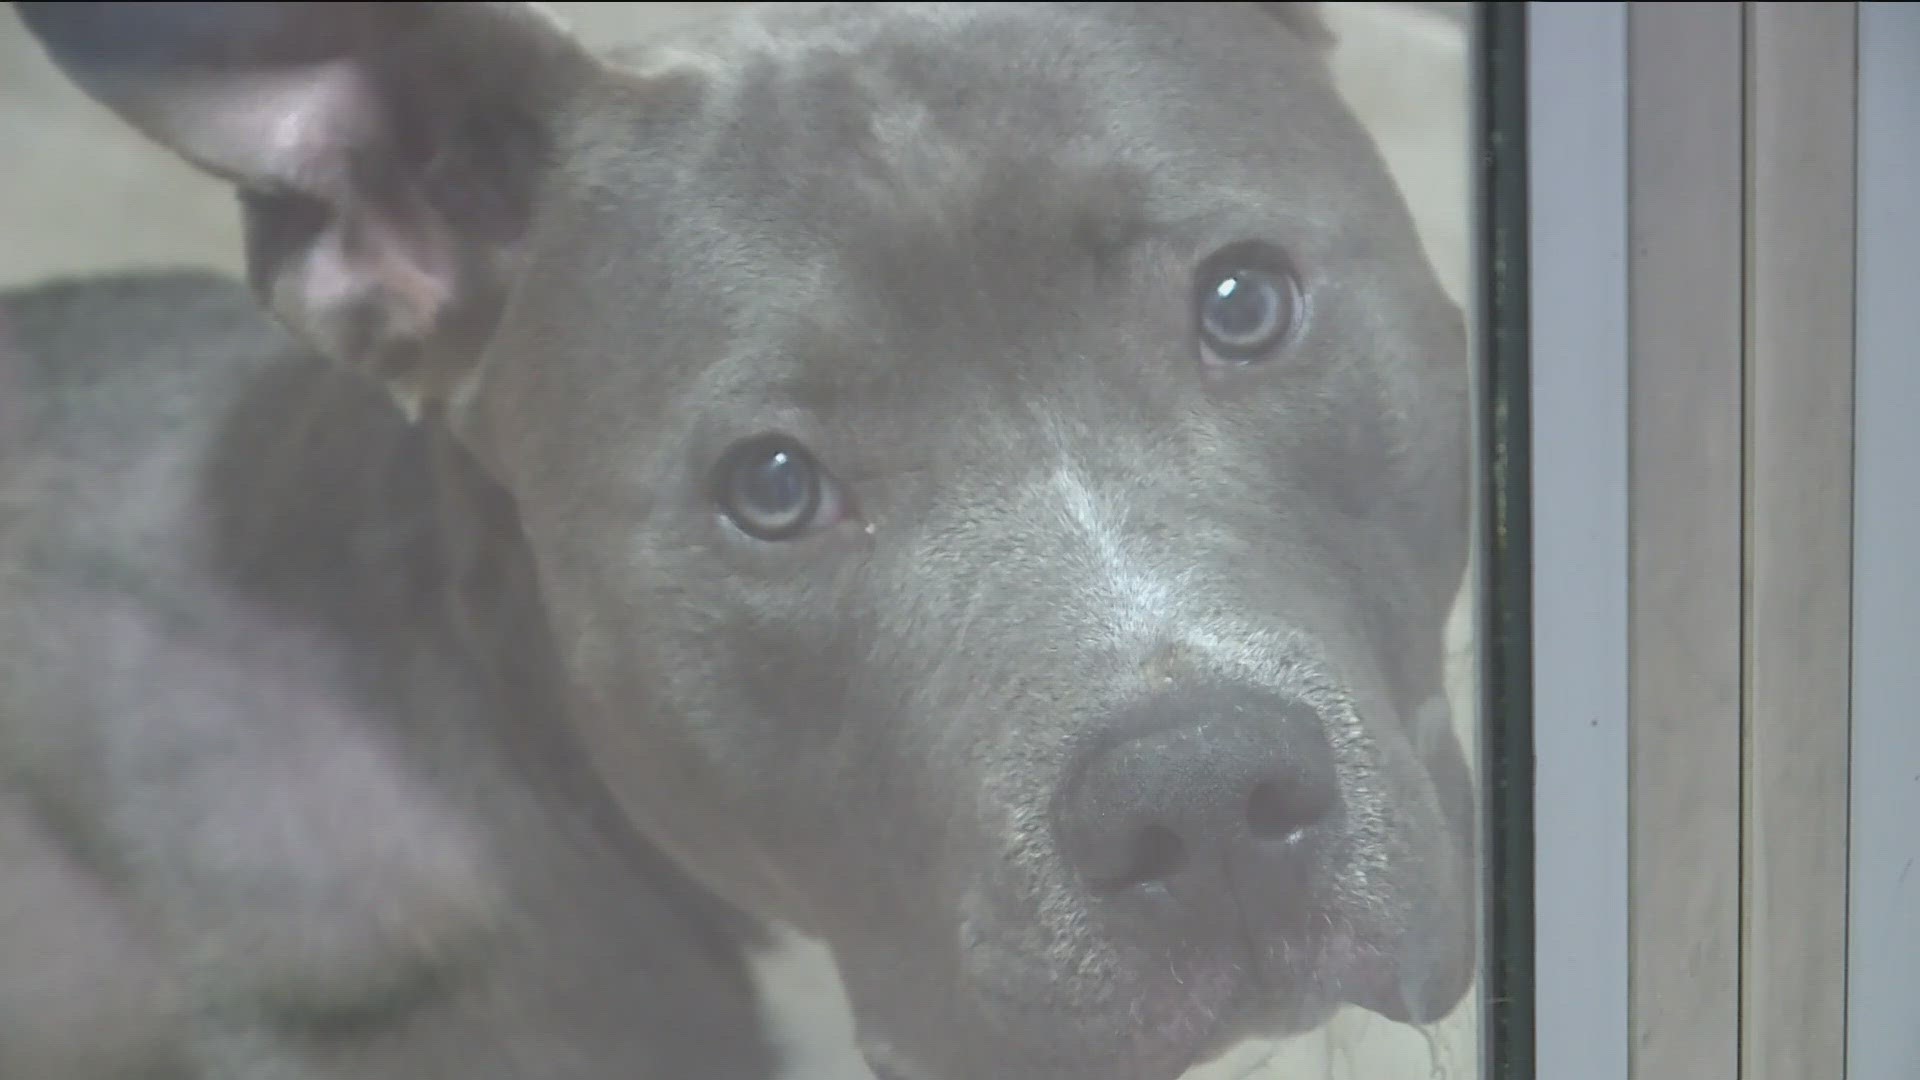 ALL NEW AT 10 – TWO ANIMAL SERVICES PARTNERING TOGETHER TO MAKE SURE MORE PETS ARE MICROCHIPPED IN NORTHWEST ARKANSAS